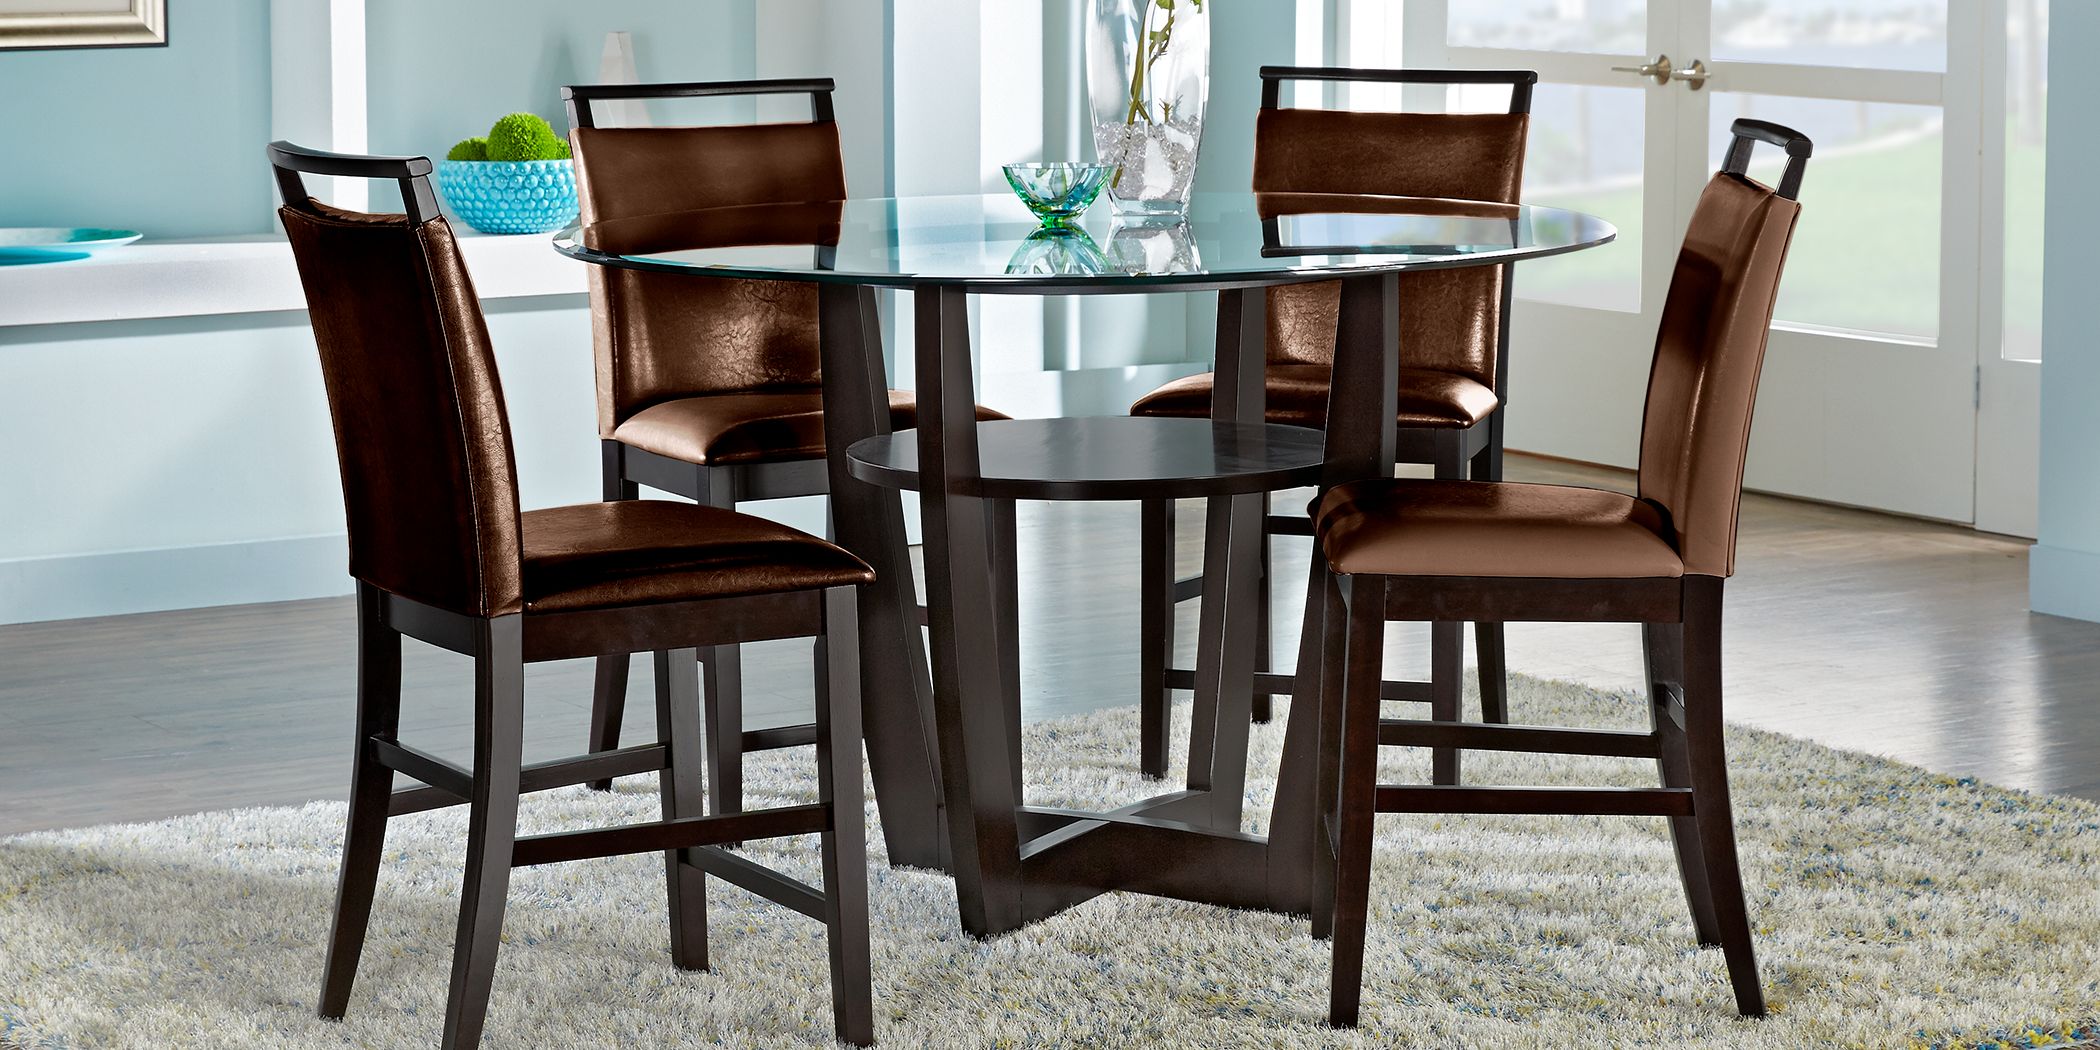 Glass Dining Table Sets, Glass Dining Room Table And Chairs Set